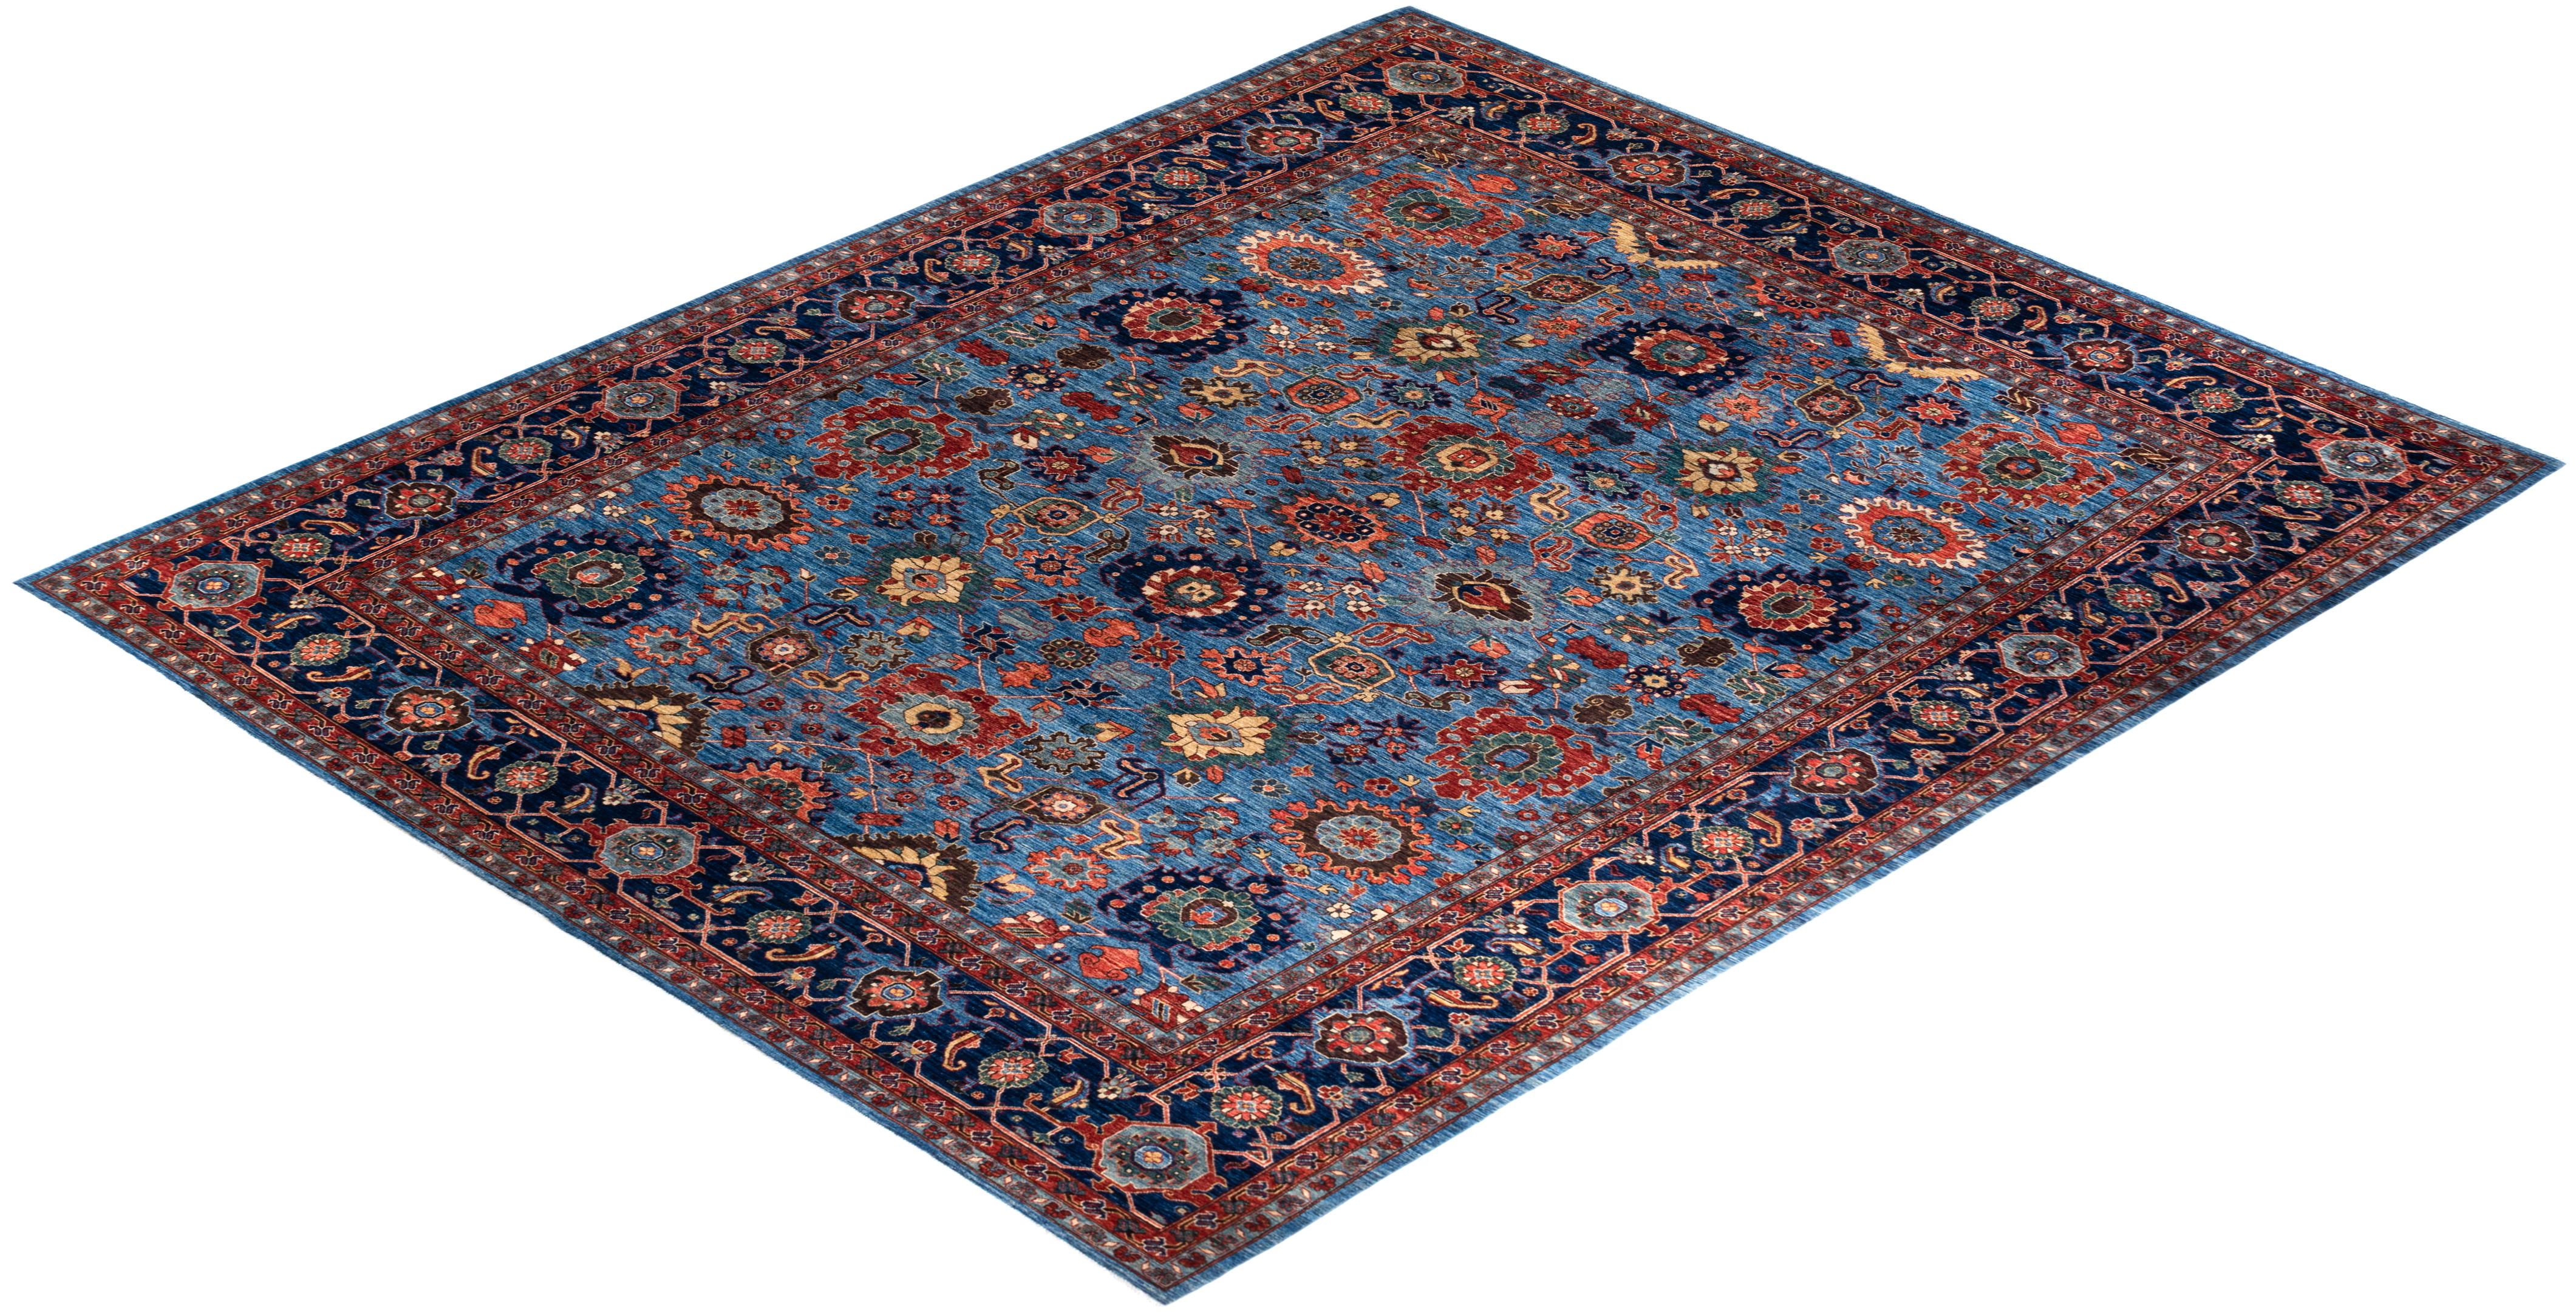 Pakistani Serapi, One-of-a-kind Hand-Knotted Runner Rug, Light Blue